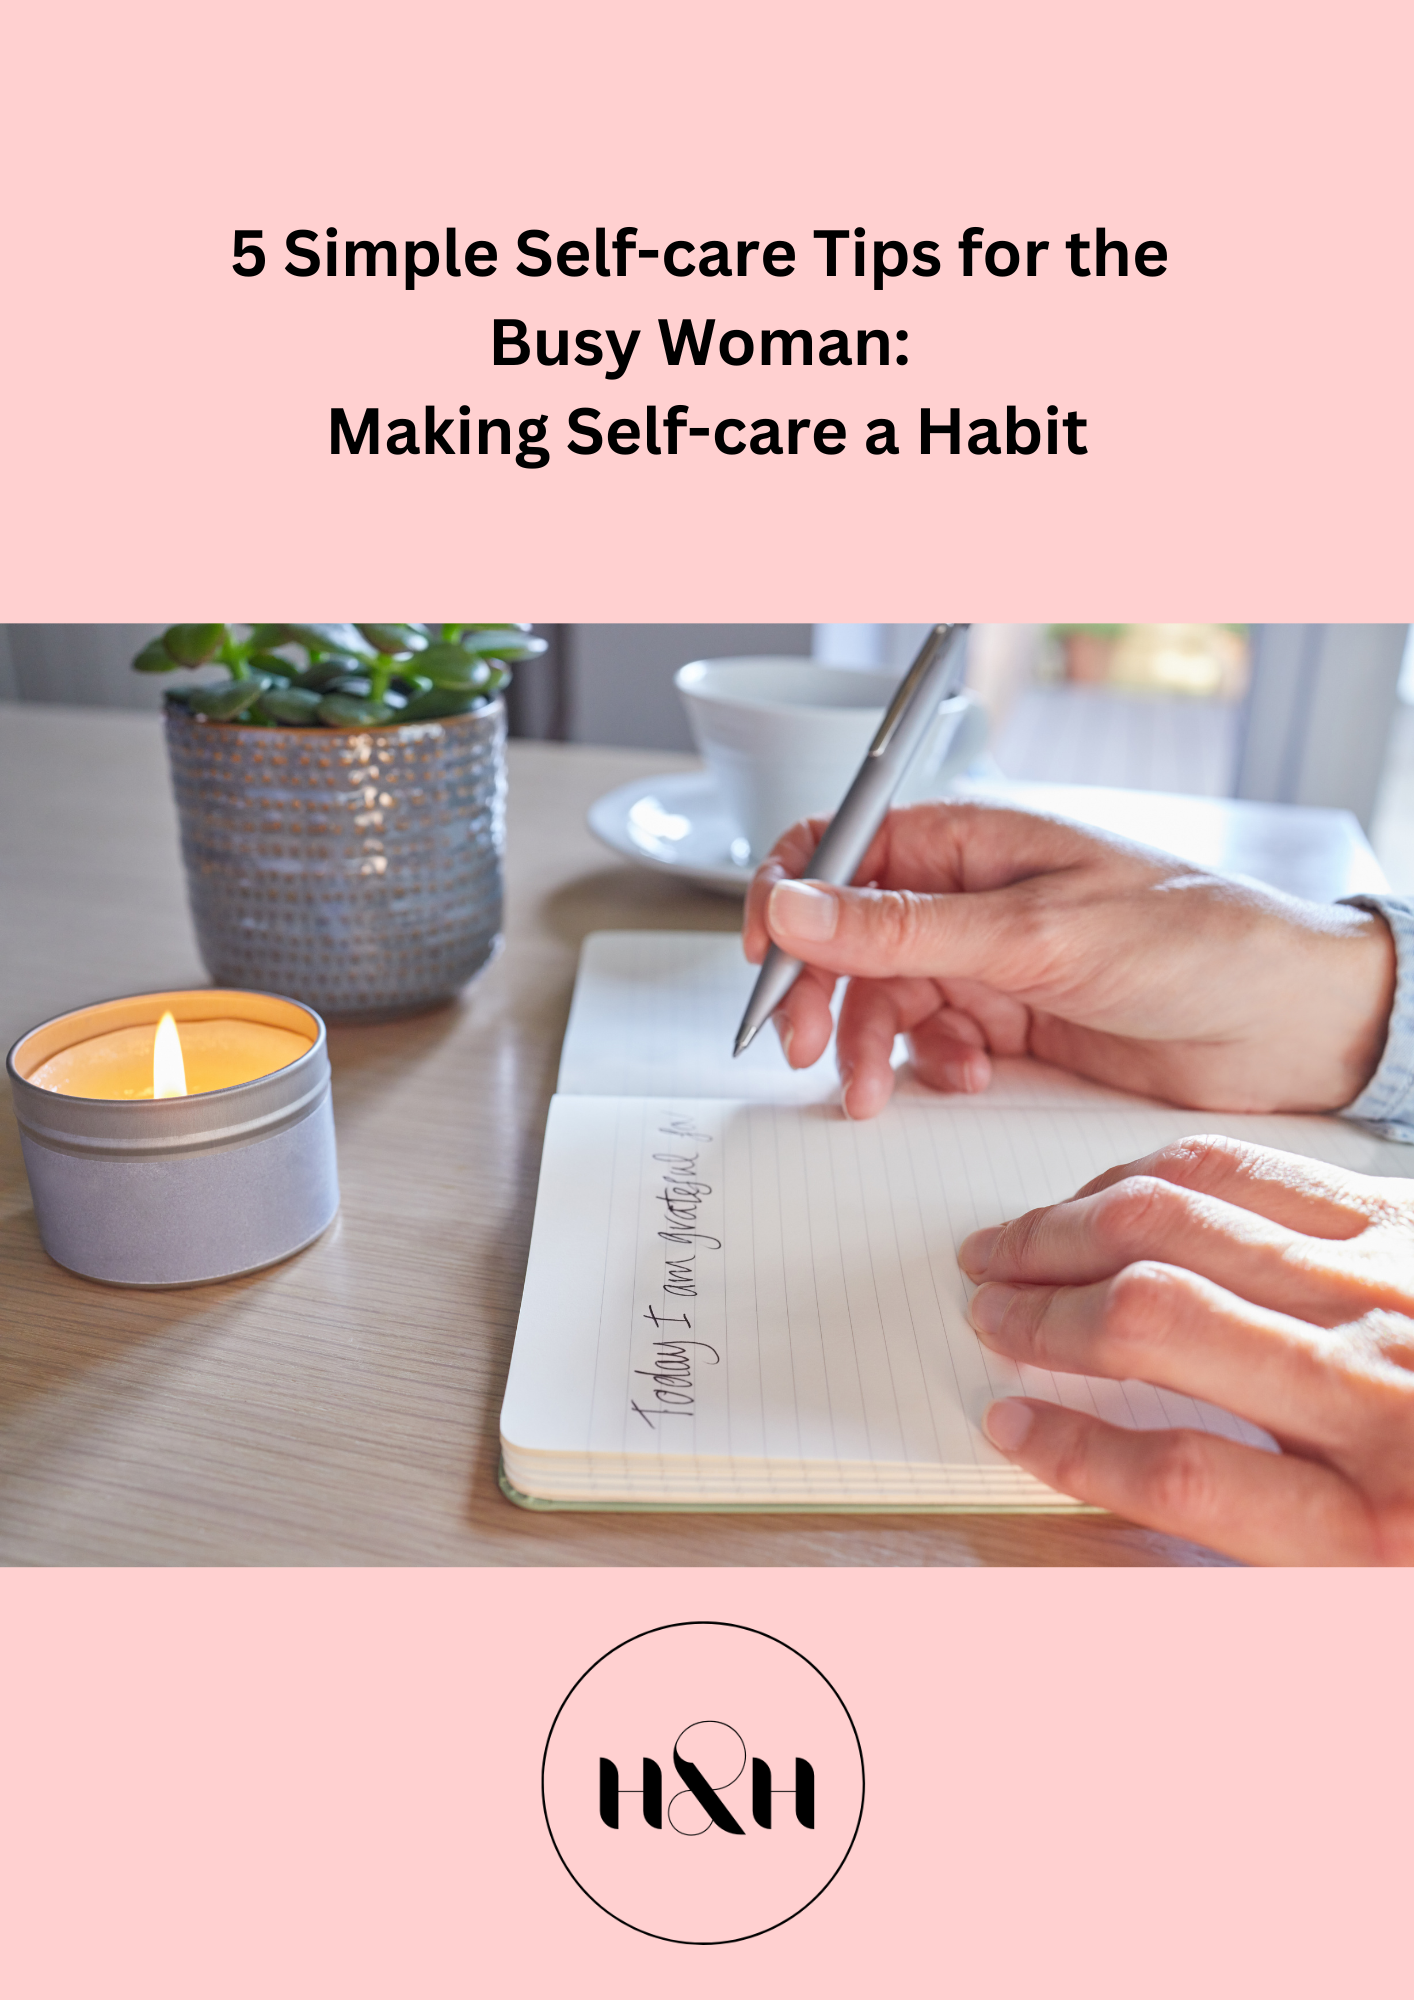 5 Simple Self-care Tips for the Busy Woman